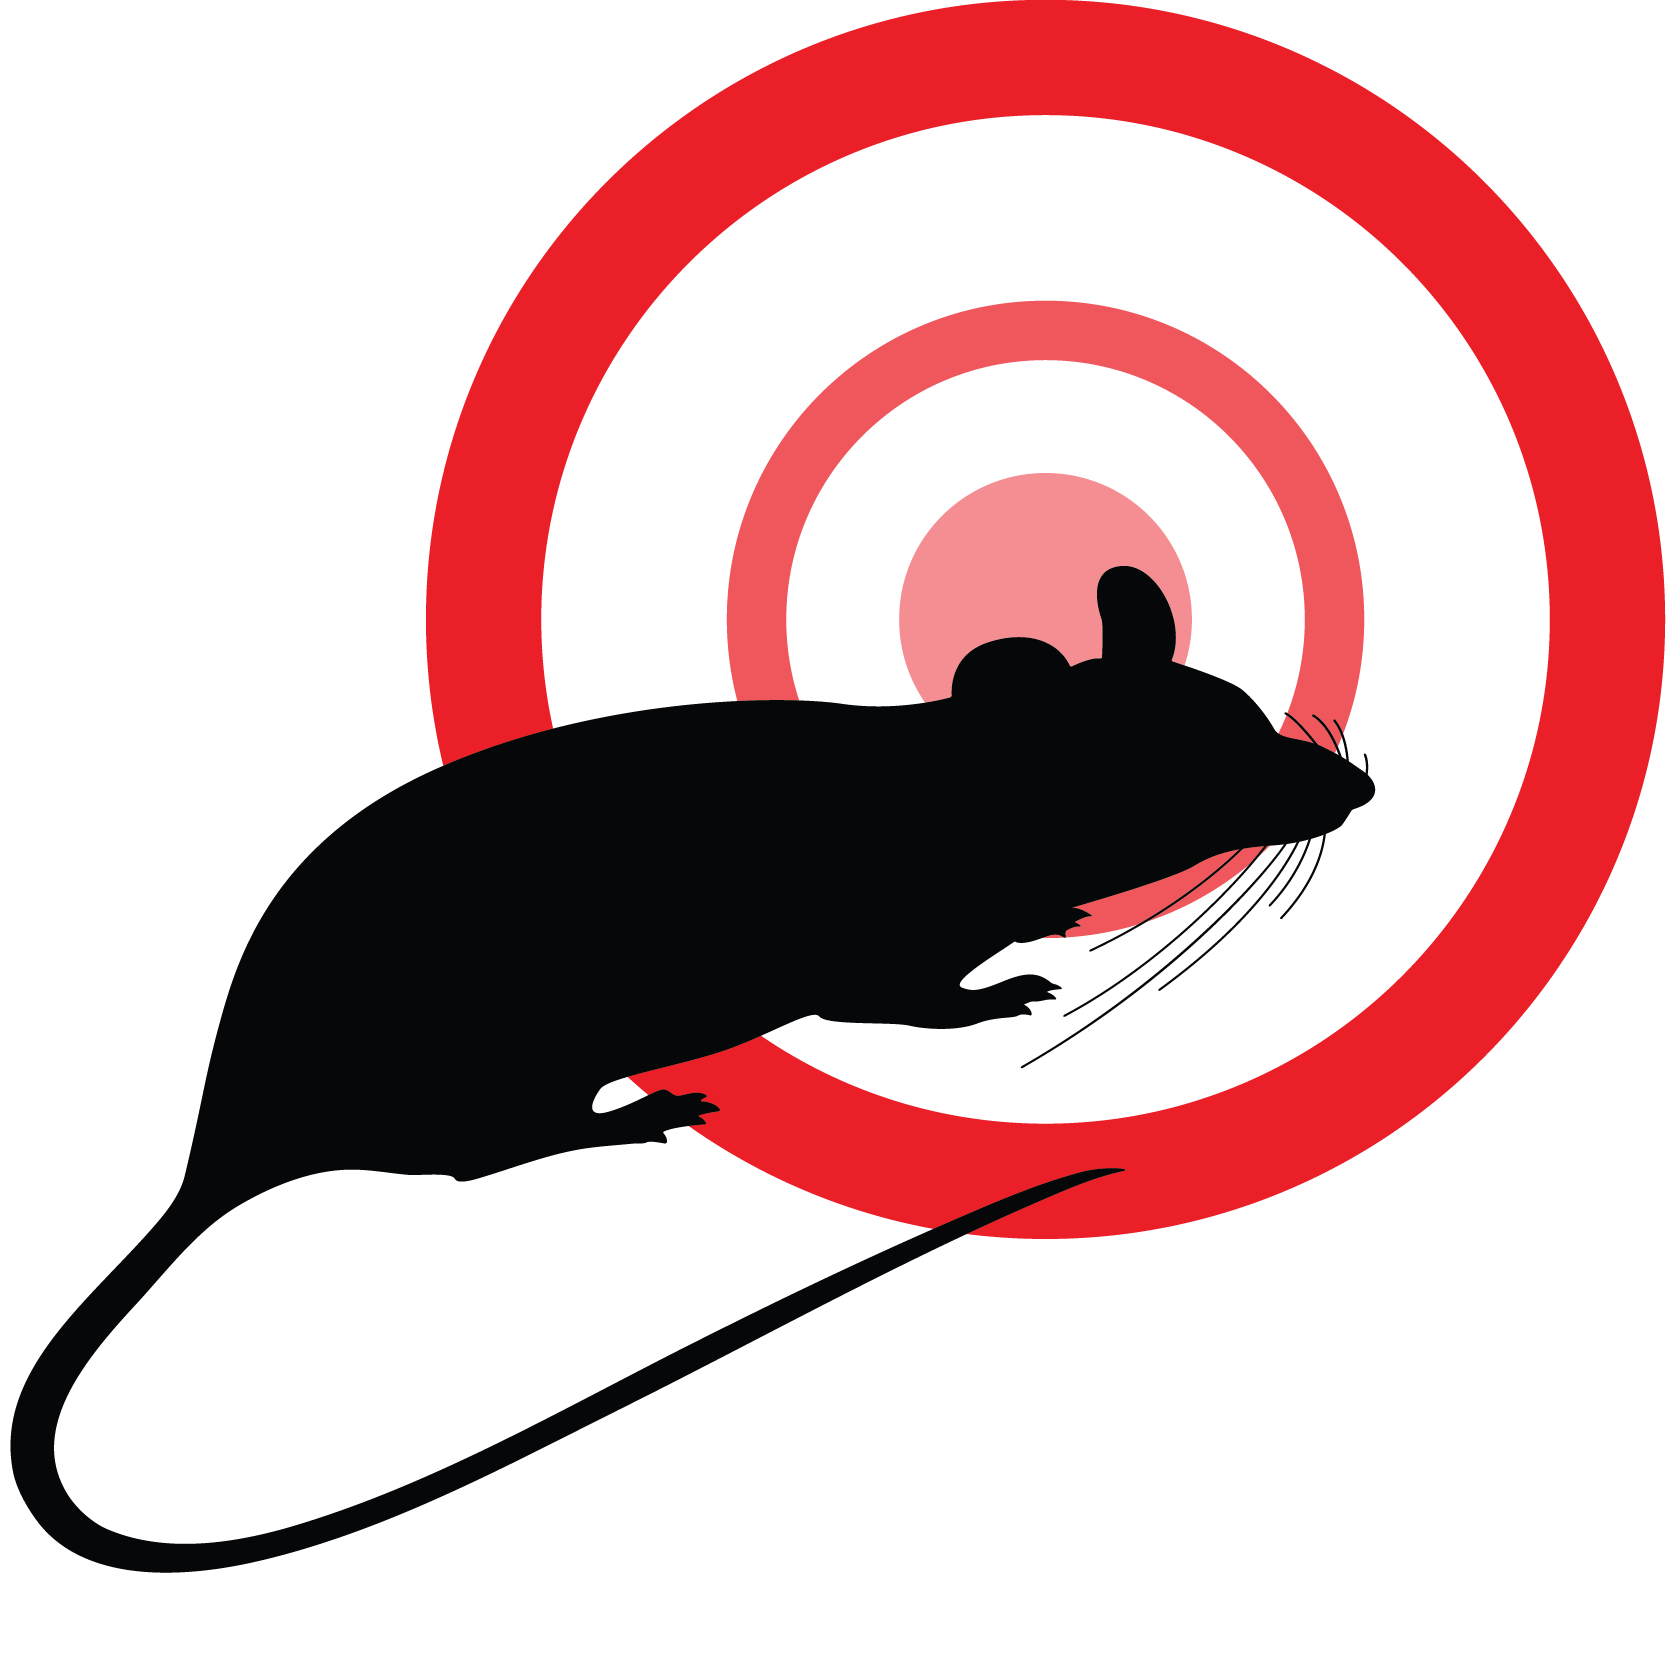 Rat with red circles representing the rodent control service